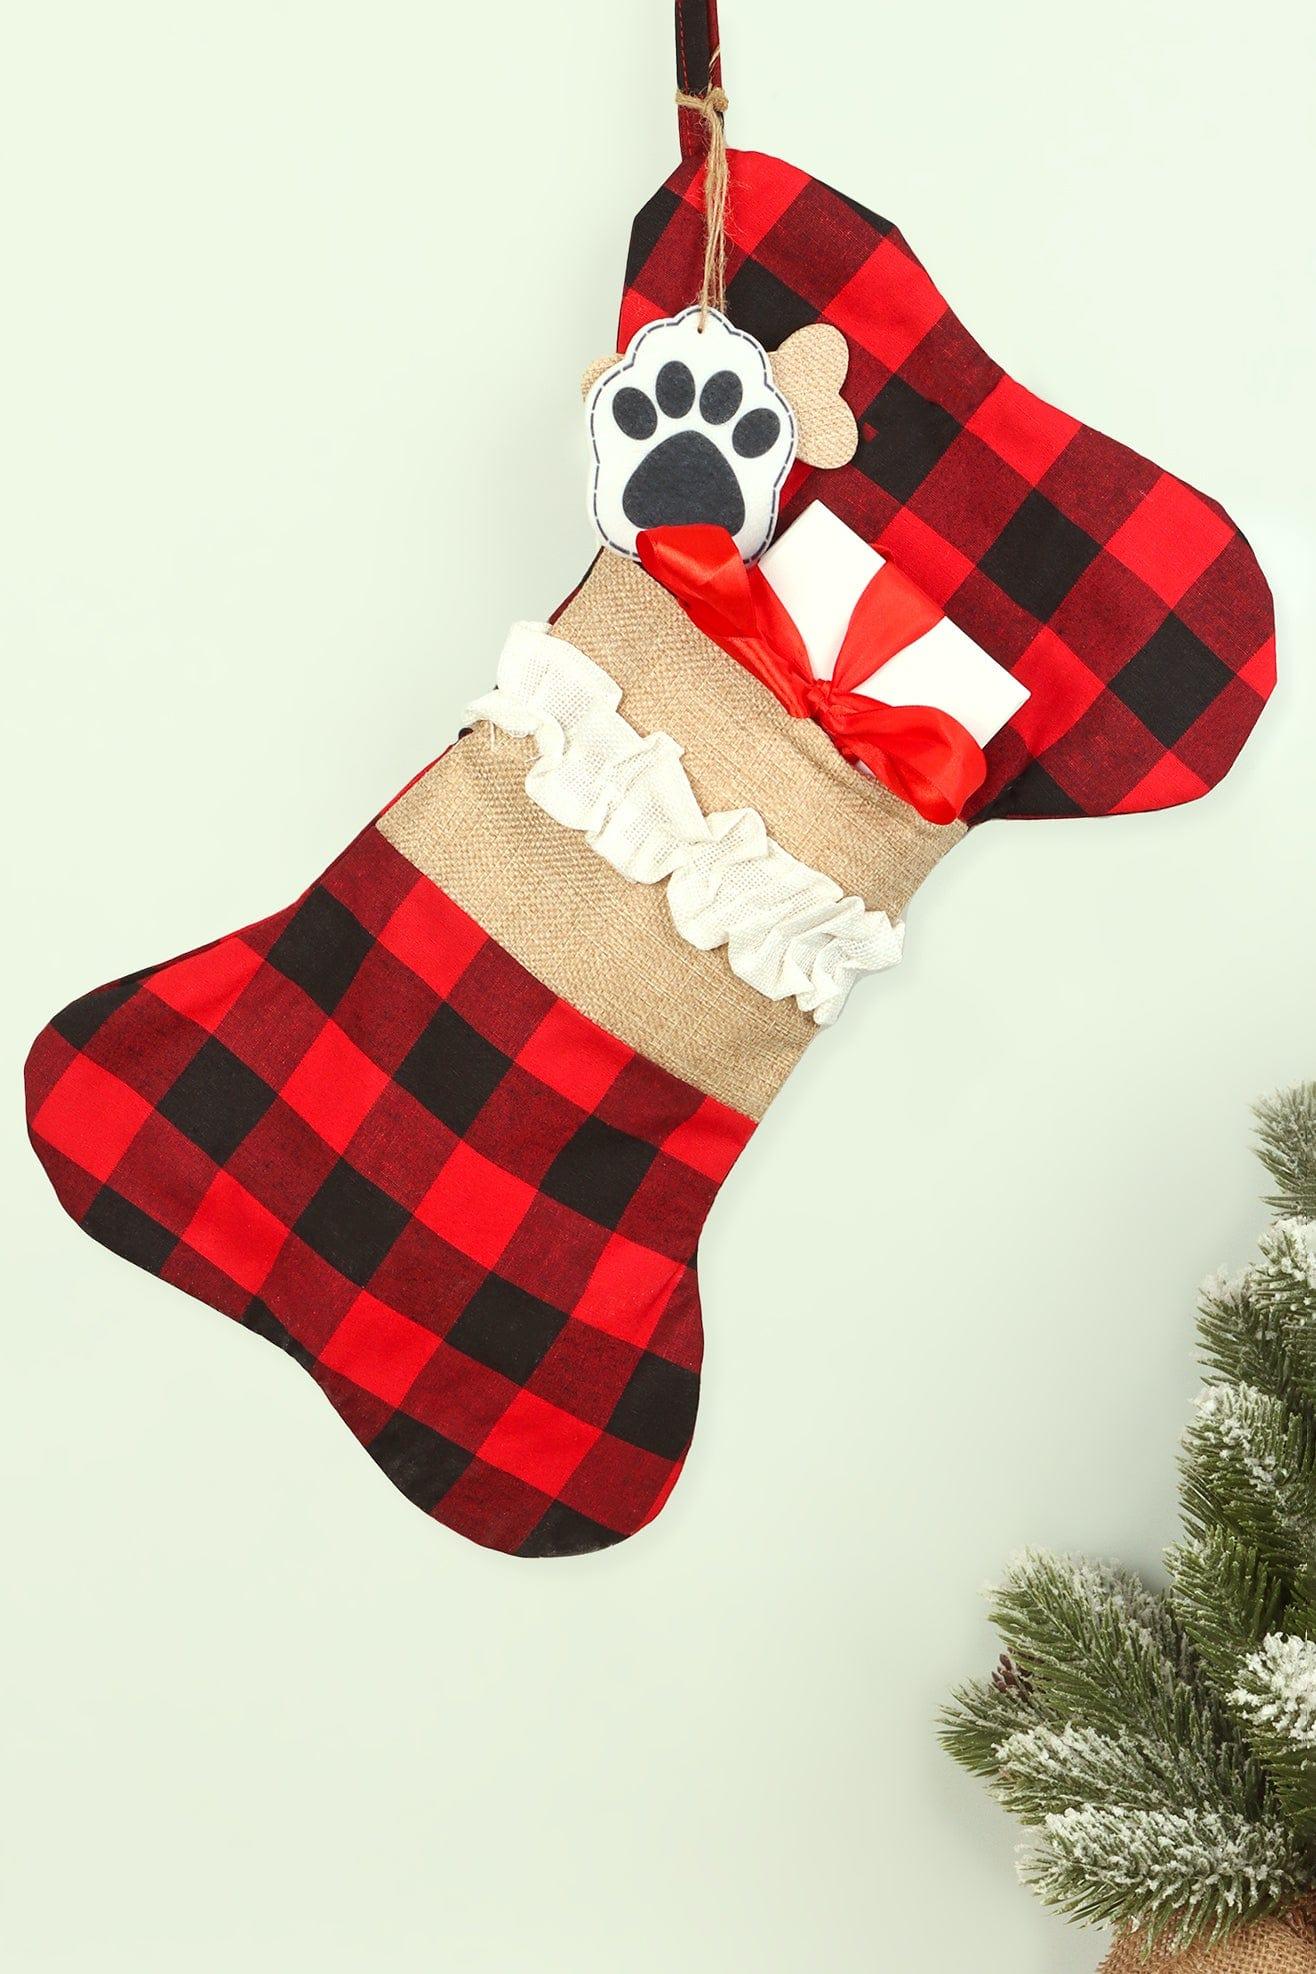 G Decor Christmas Decorations Red Black and Red Check Pattern Christmas Stocking for Pets